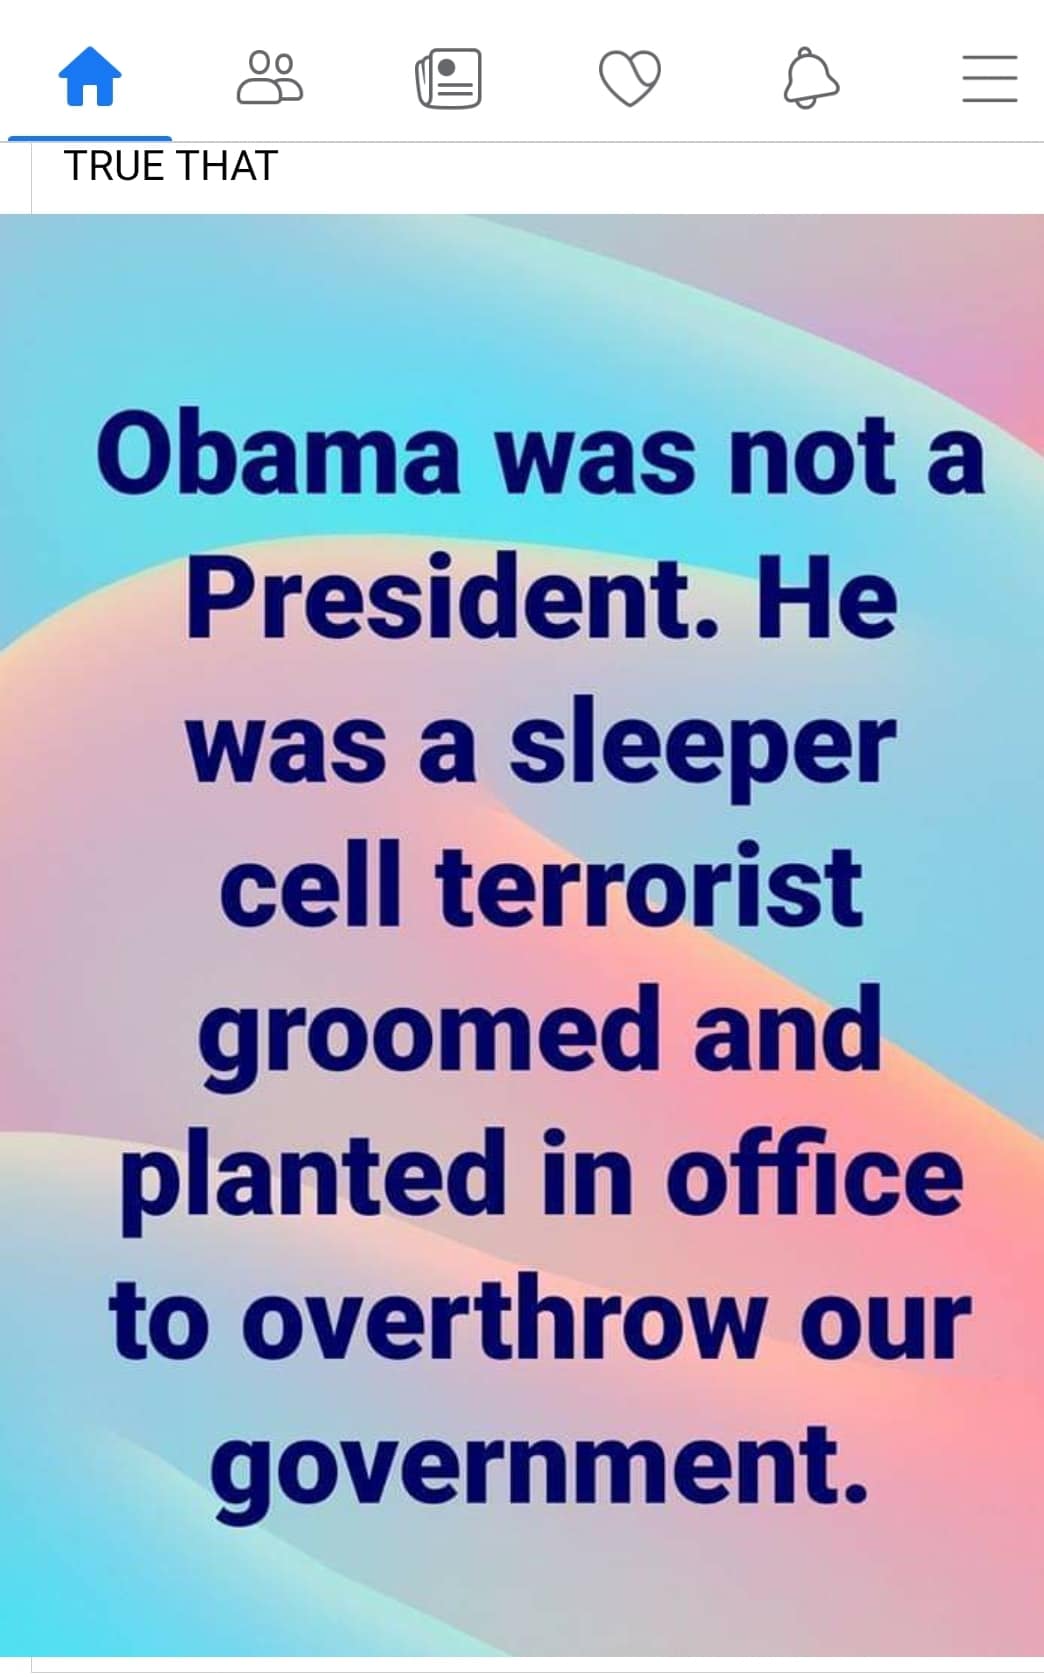 Political, Trump boomer memes Political, Trump text: oo TRUE THAT 0 Obama was not a President. He was a sleeper cell terrorist groomed and planted in office to overthrow our government. 